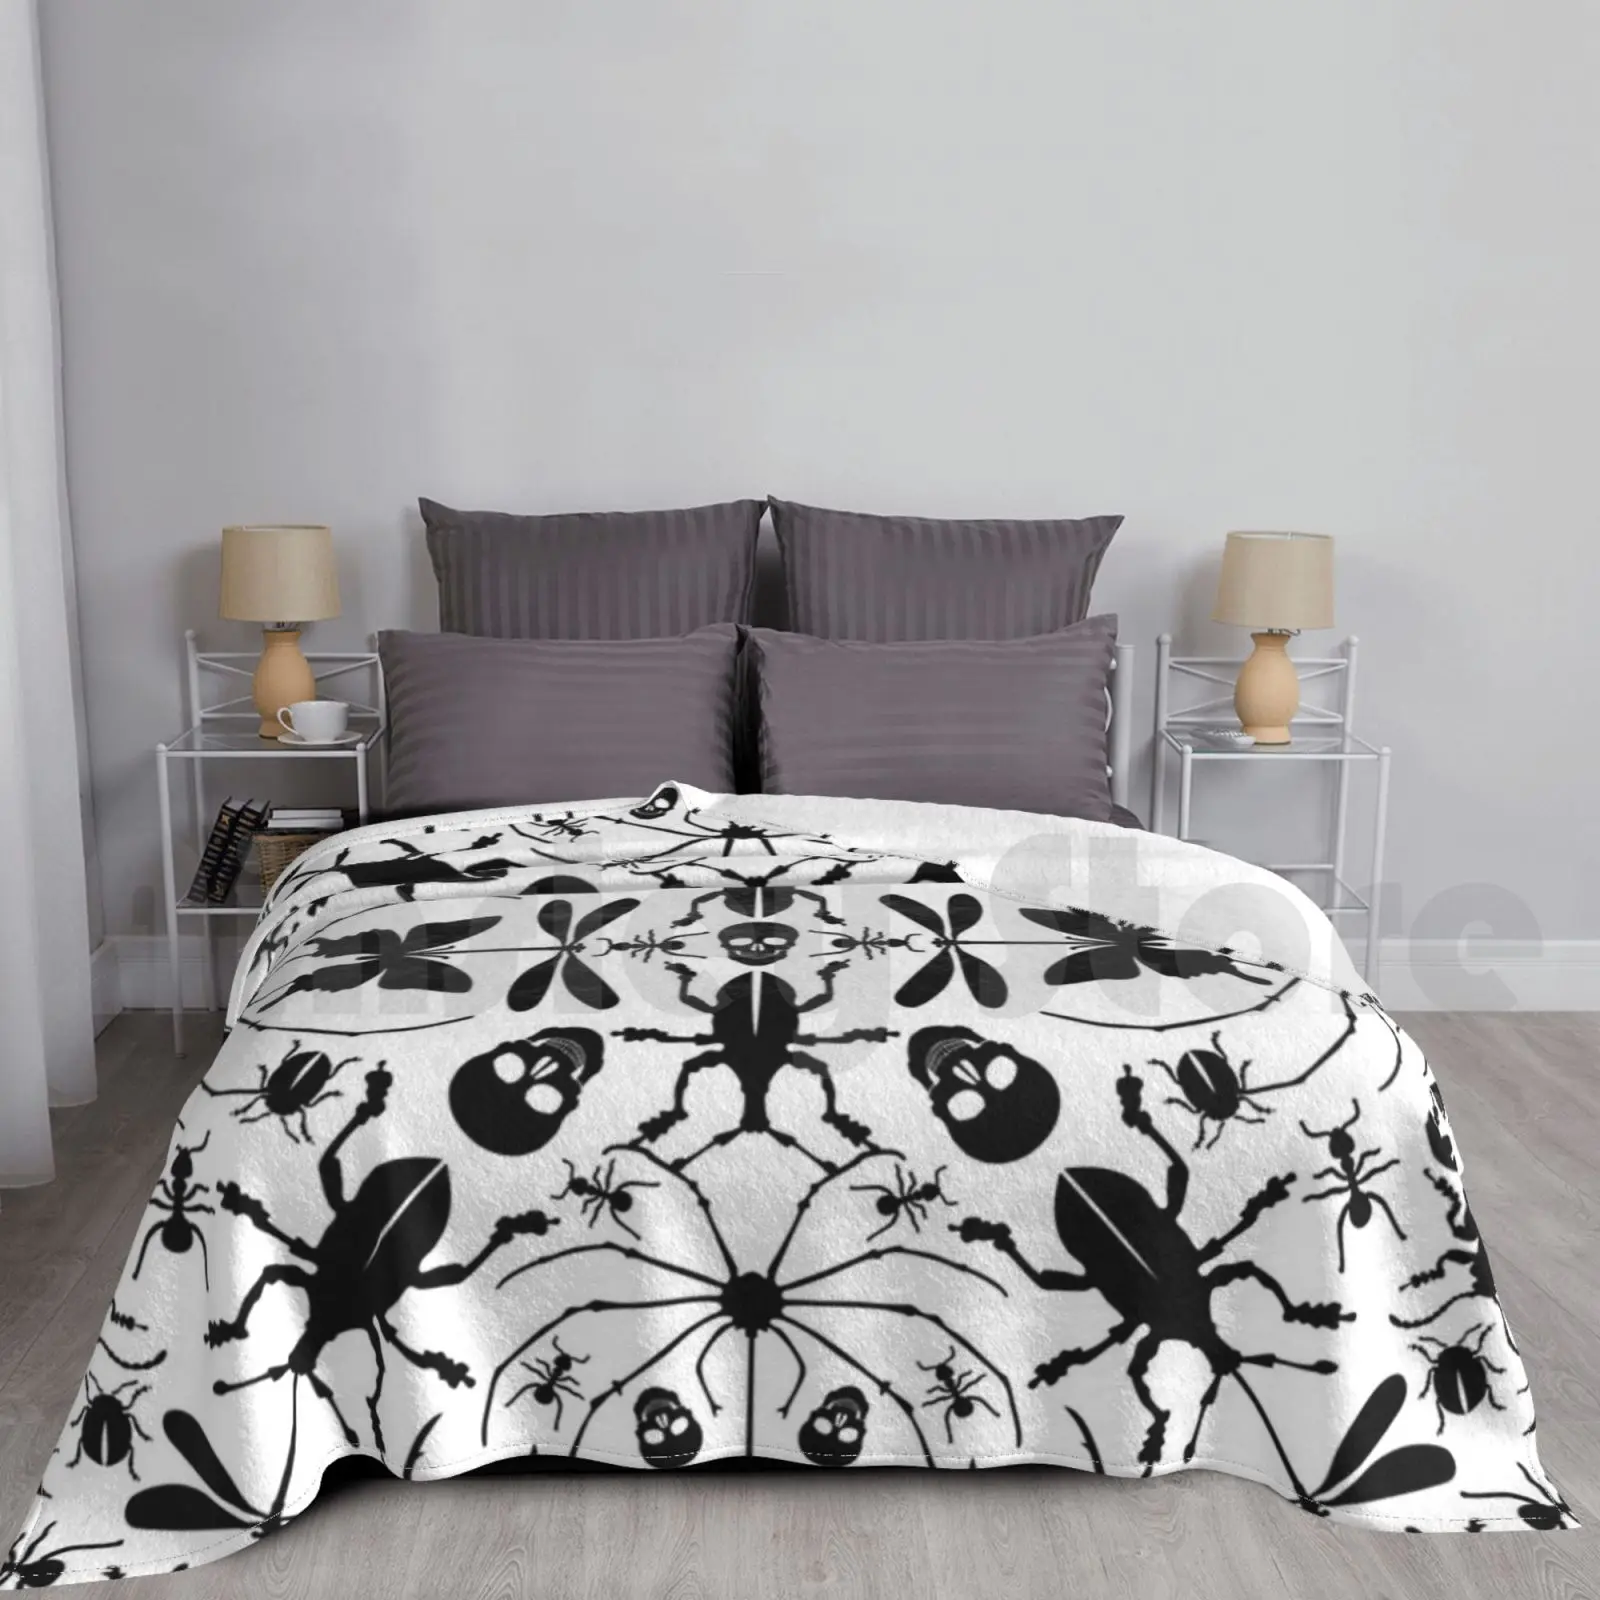 

Black Insects And Skulls On White Blanket For Sofa Bed Travel Insects Beetles Dragonfly Stag Beetle Insect